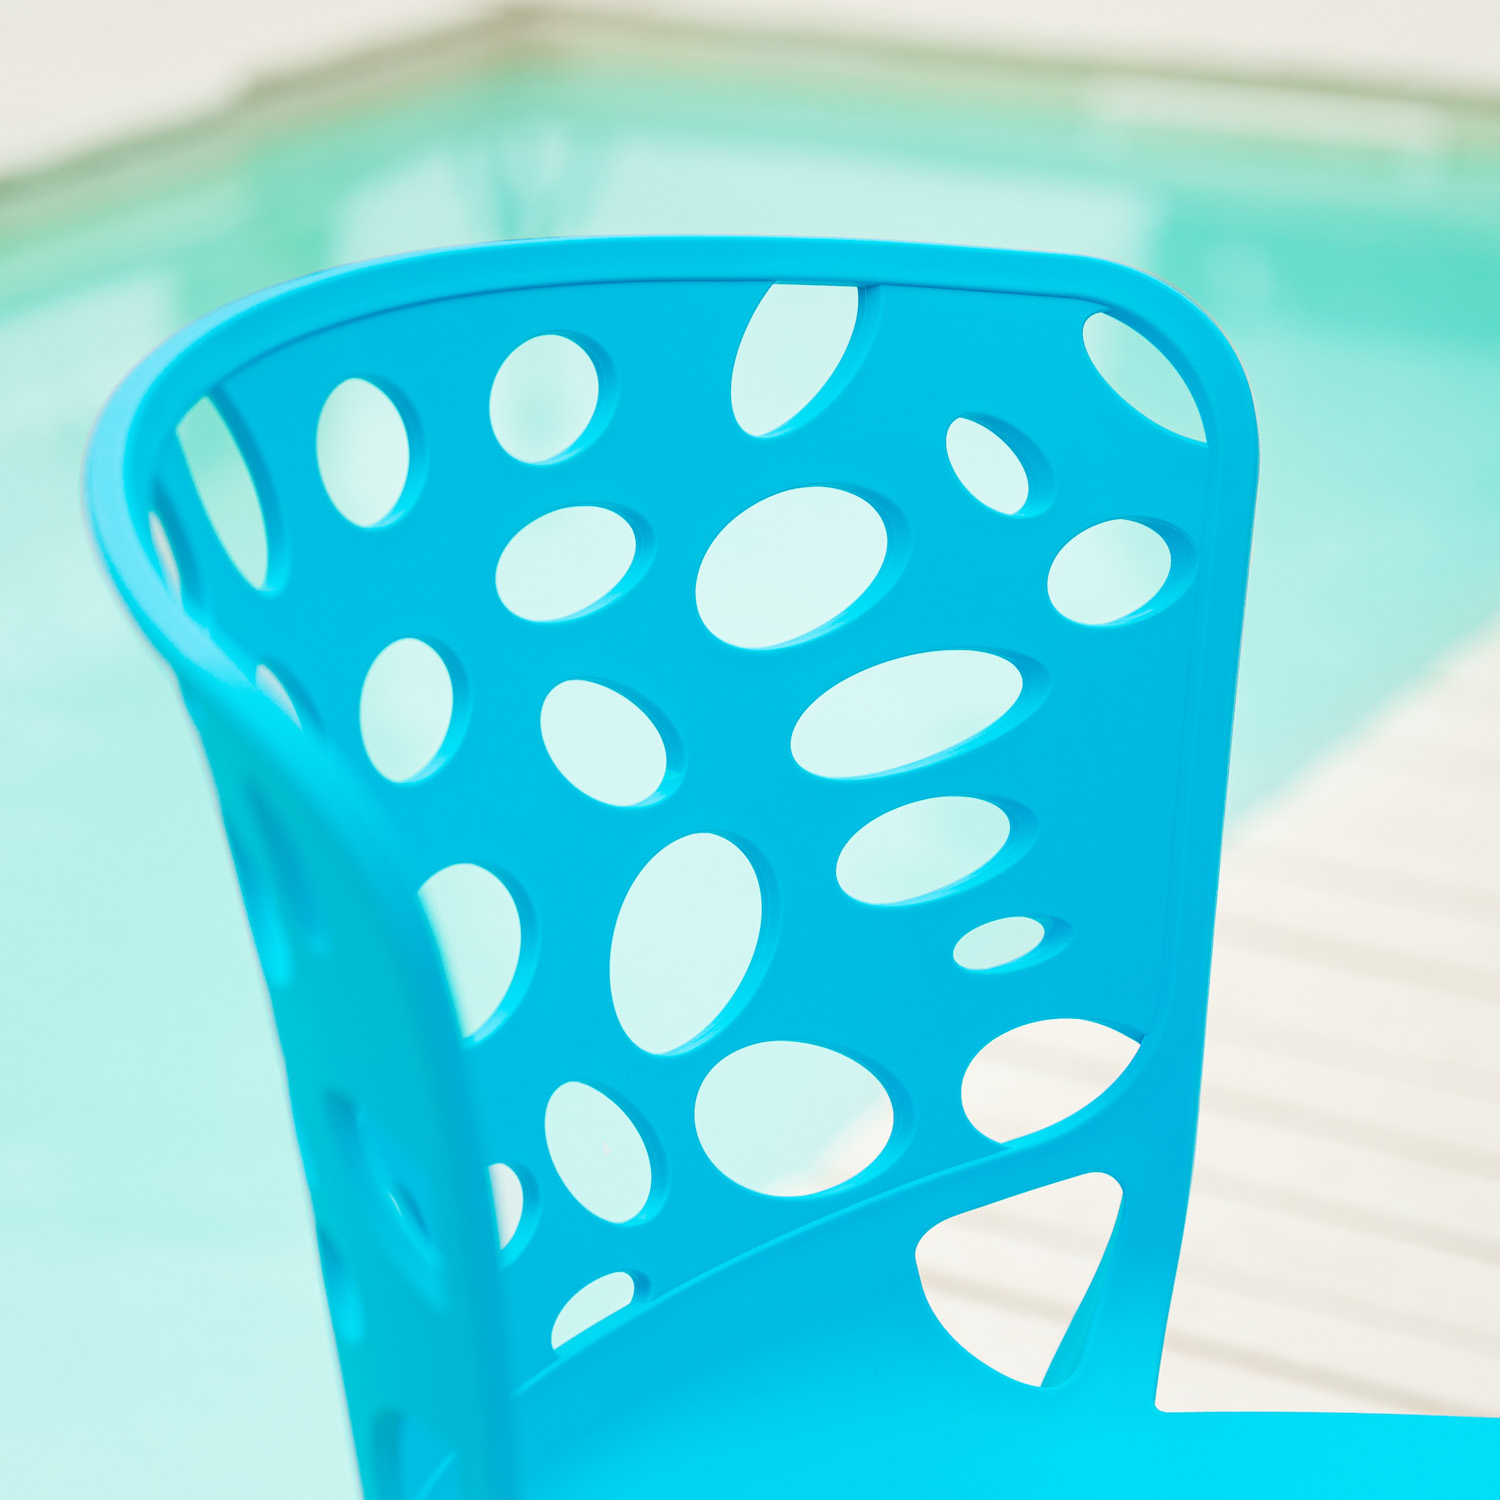 Garden chair Set of 6 Modern Blue Camping chairs Outdoor chairs Plastic Stacking chairs Kitchen chairs